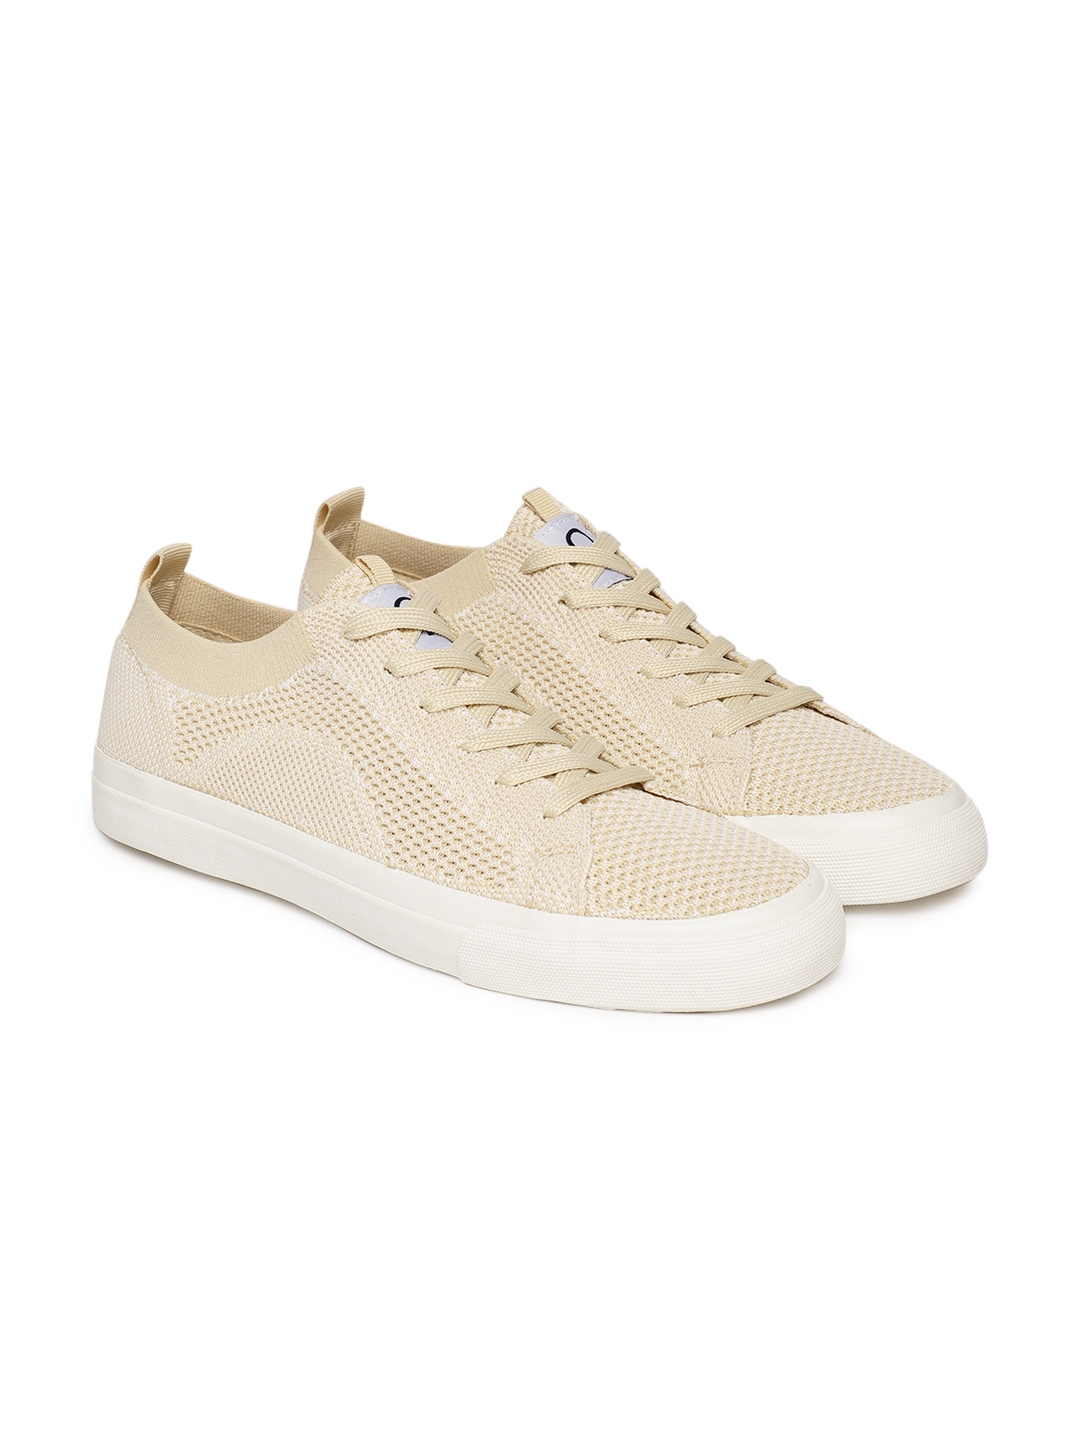 beige colour sneakers